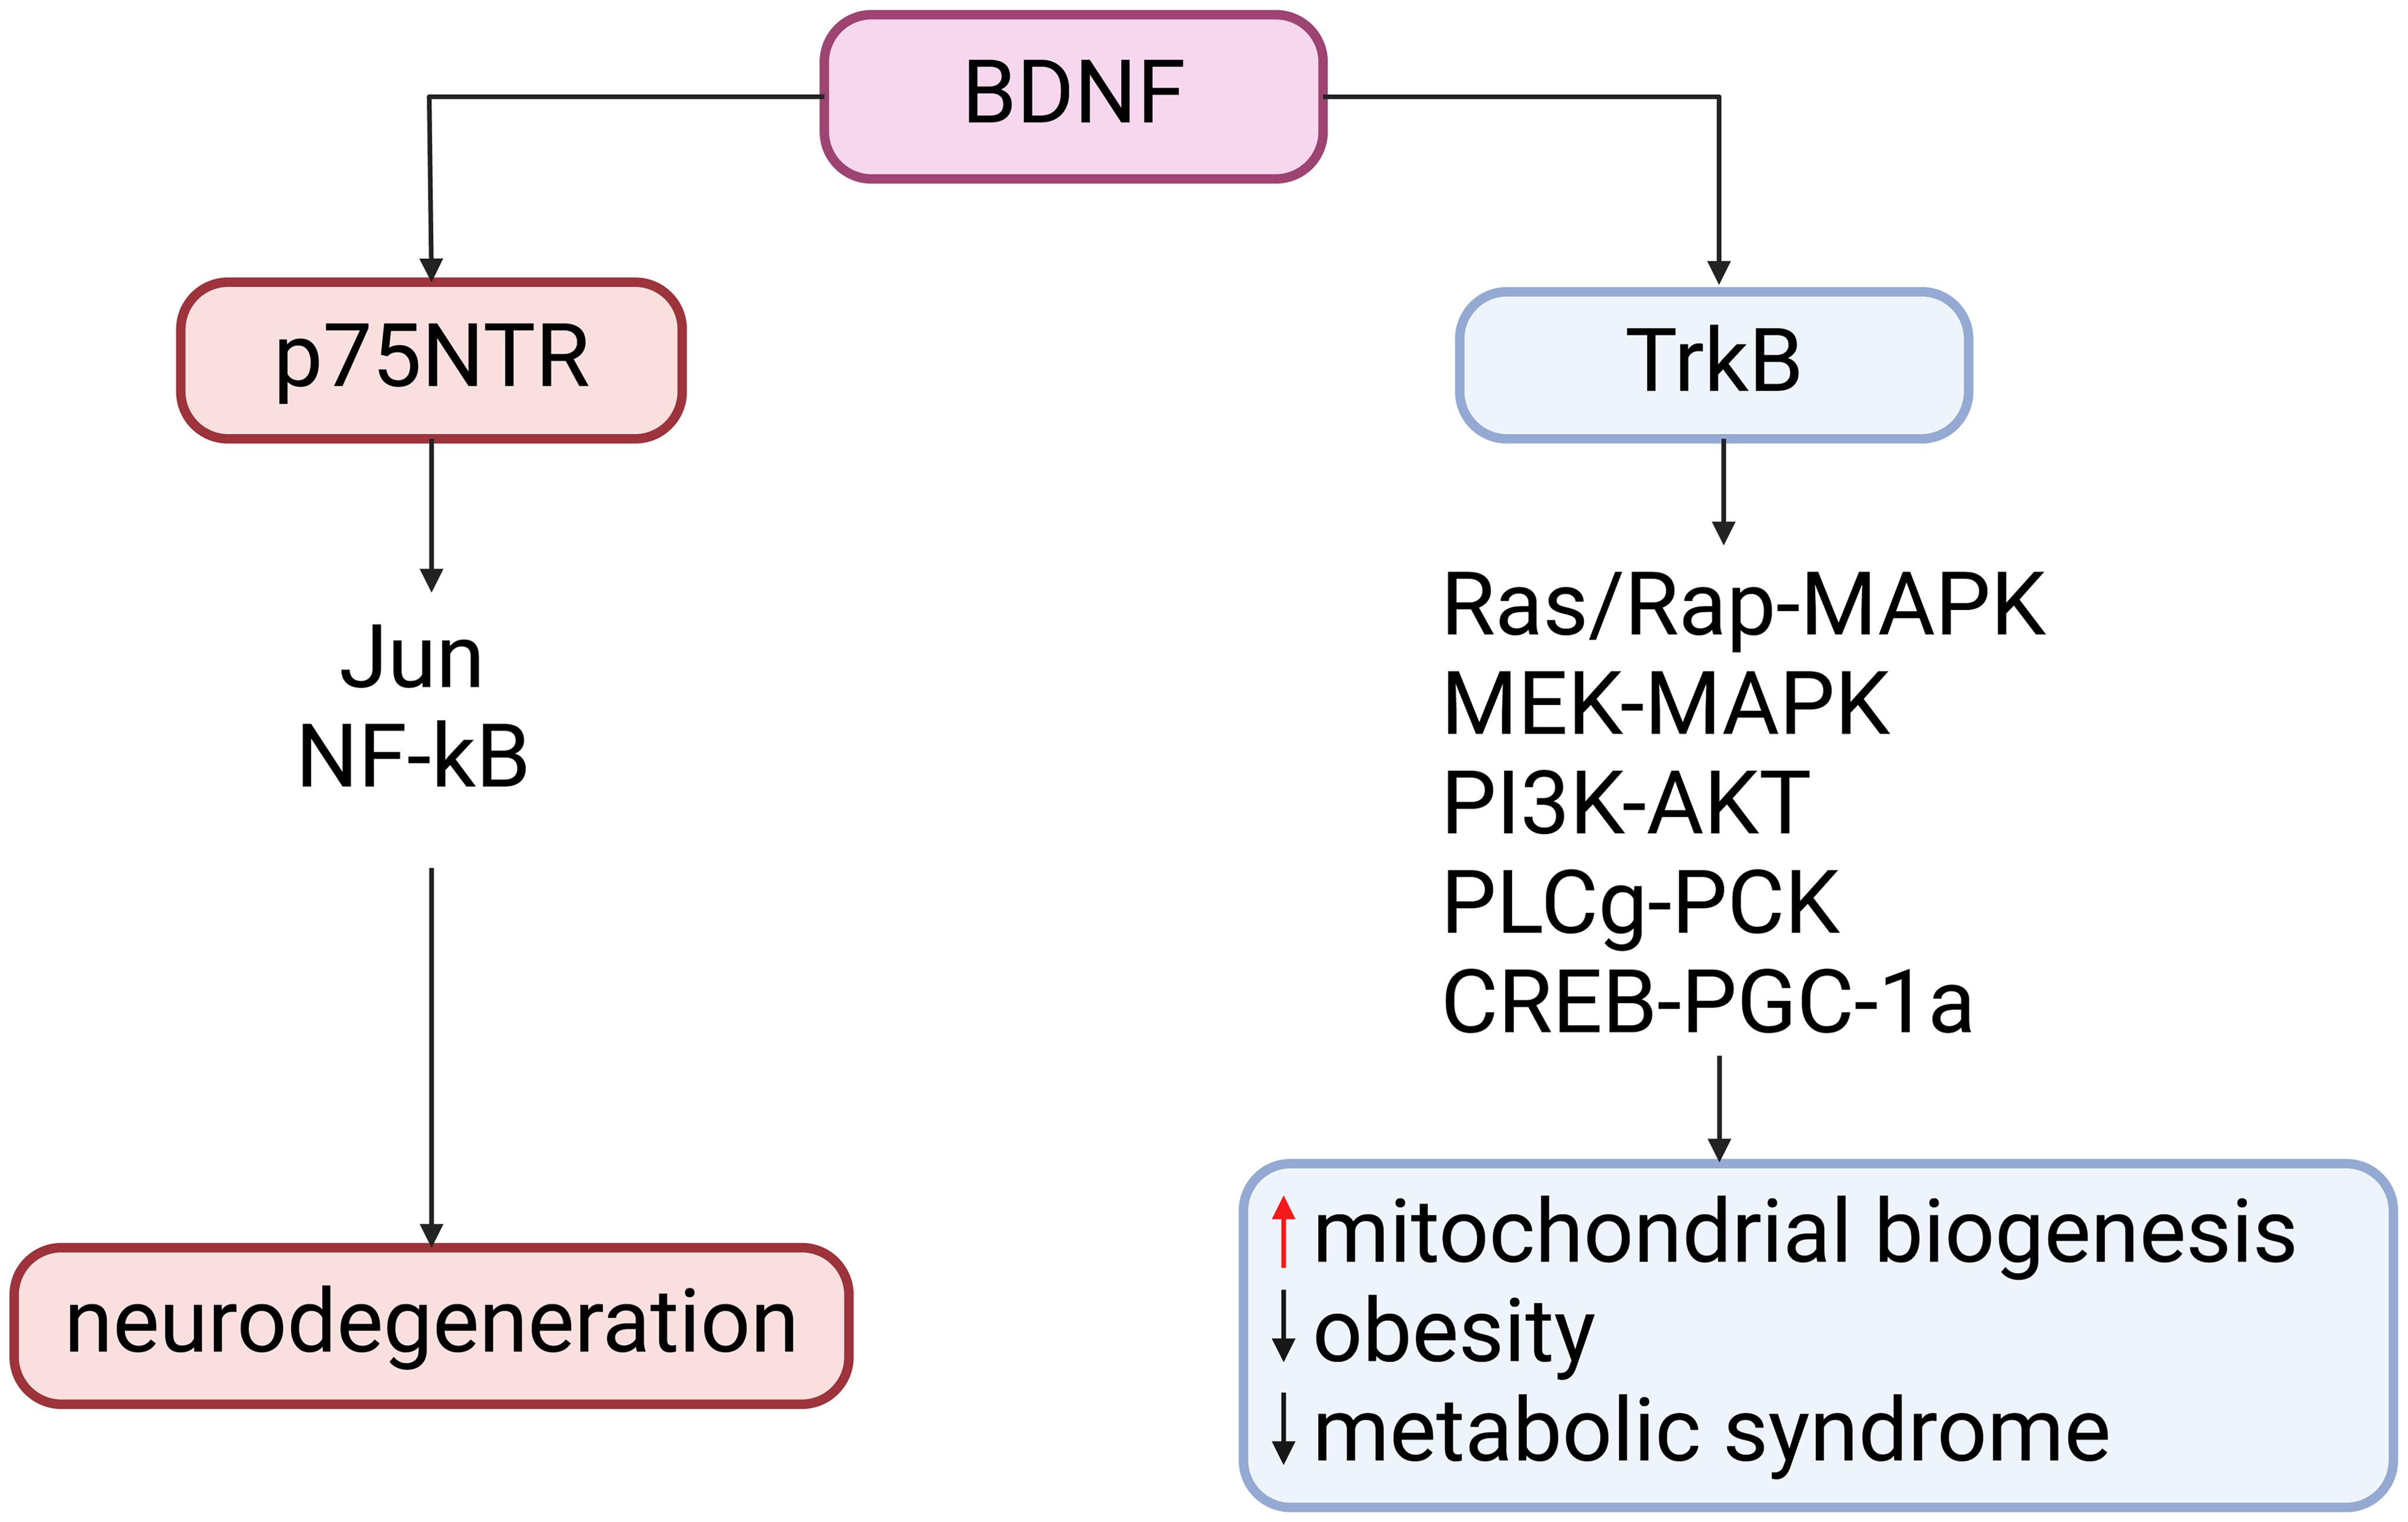 Signaling pathways regulated by BDNF in the brain.